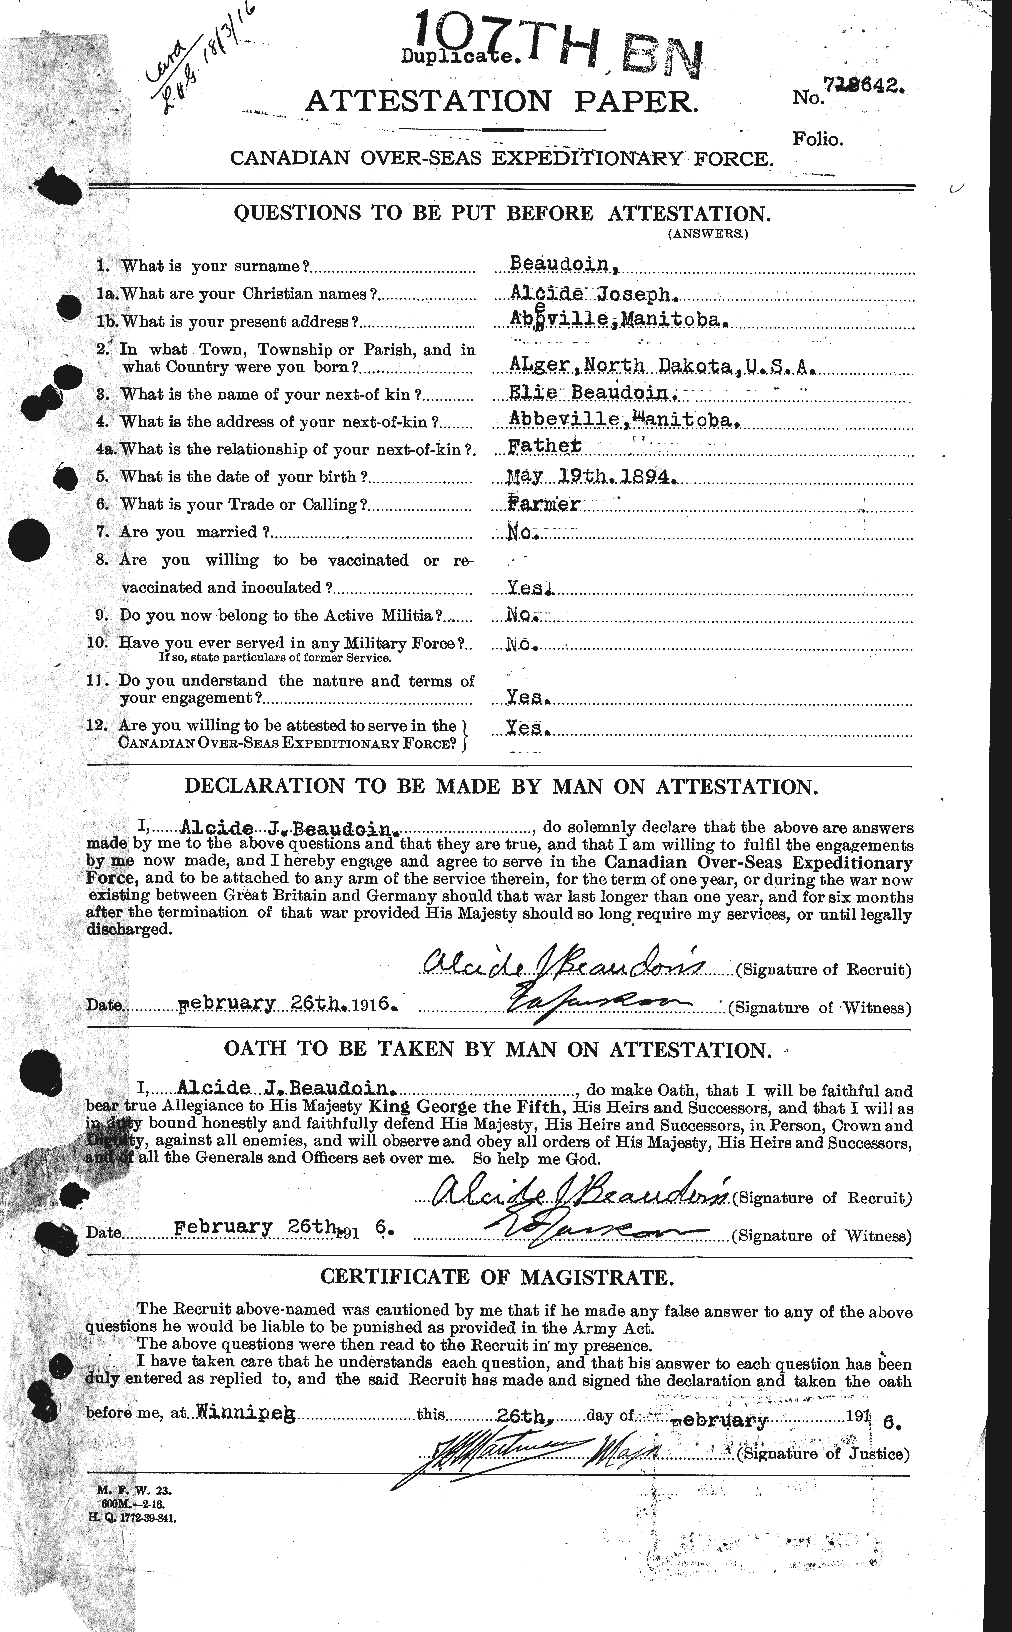 Personnel Records of the First World War - CEF 231200a